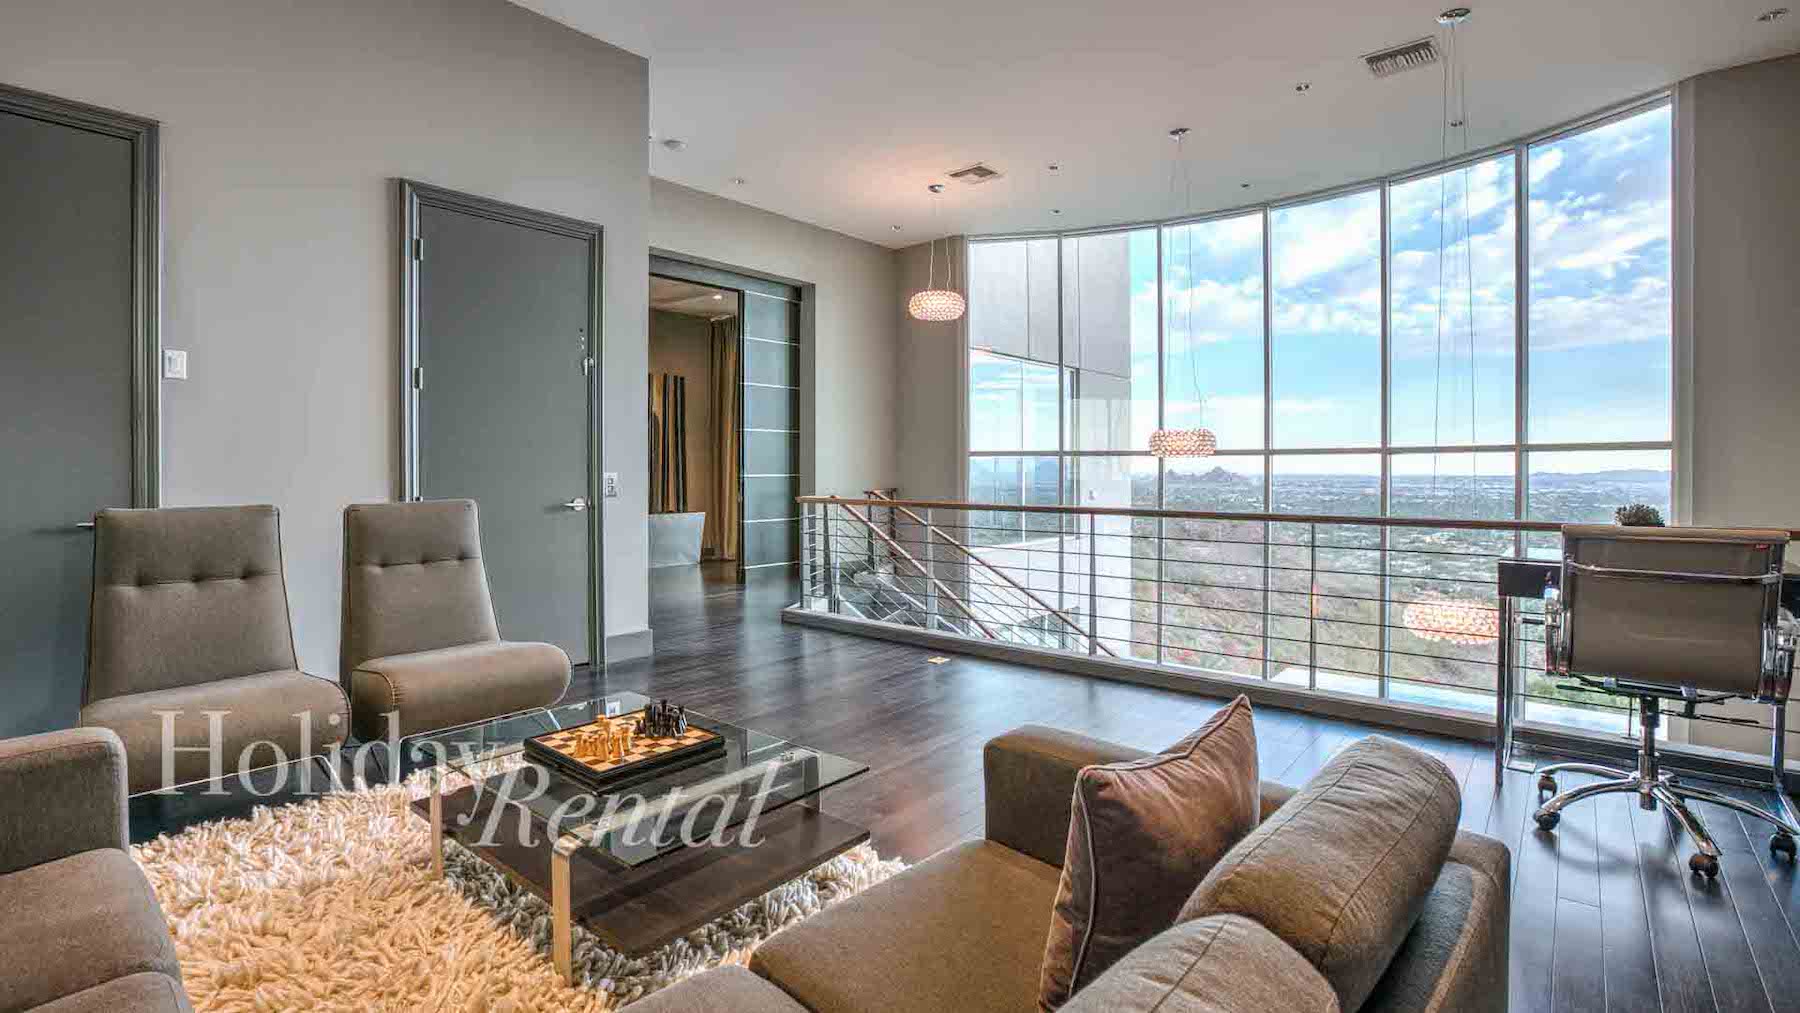 vacation rental living room with amazing window views